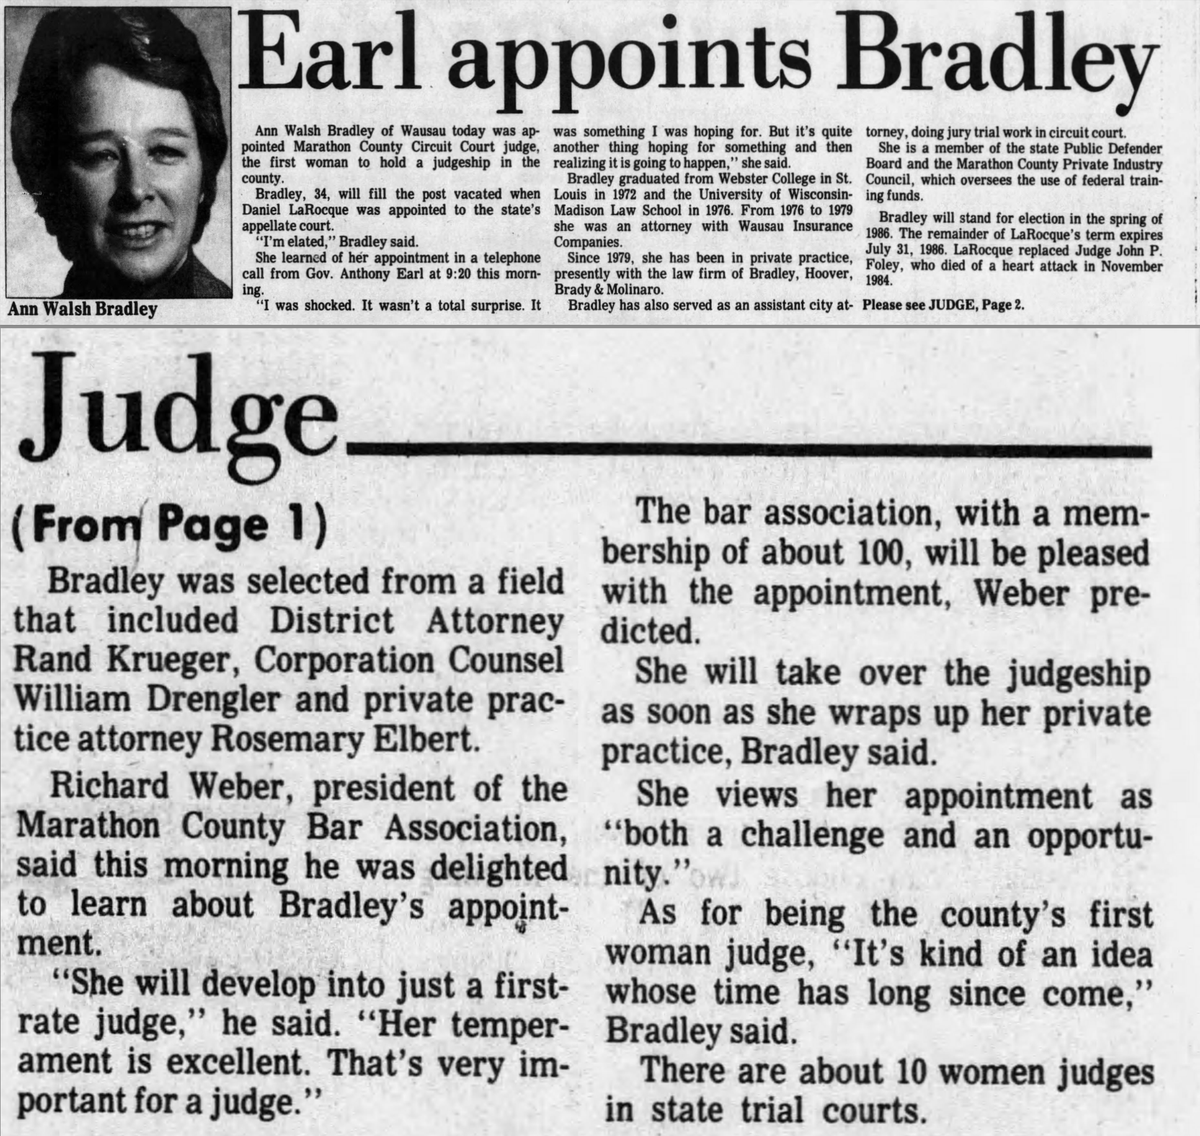 When retiring WI Supreme Court Justice Ann Walsh Bradley was appointed to the bench by Dem Gov. Tony Earl in 1985, that made her the first woman judge in Marathon County (home of Wausau) Wausau Daily Herald clip below newspapers.com/image/27191896…